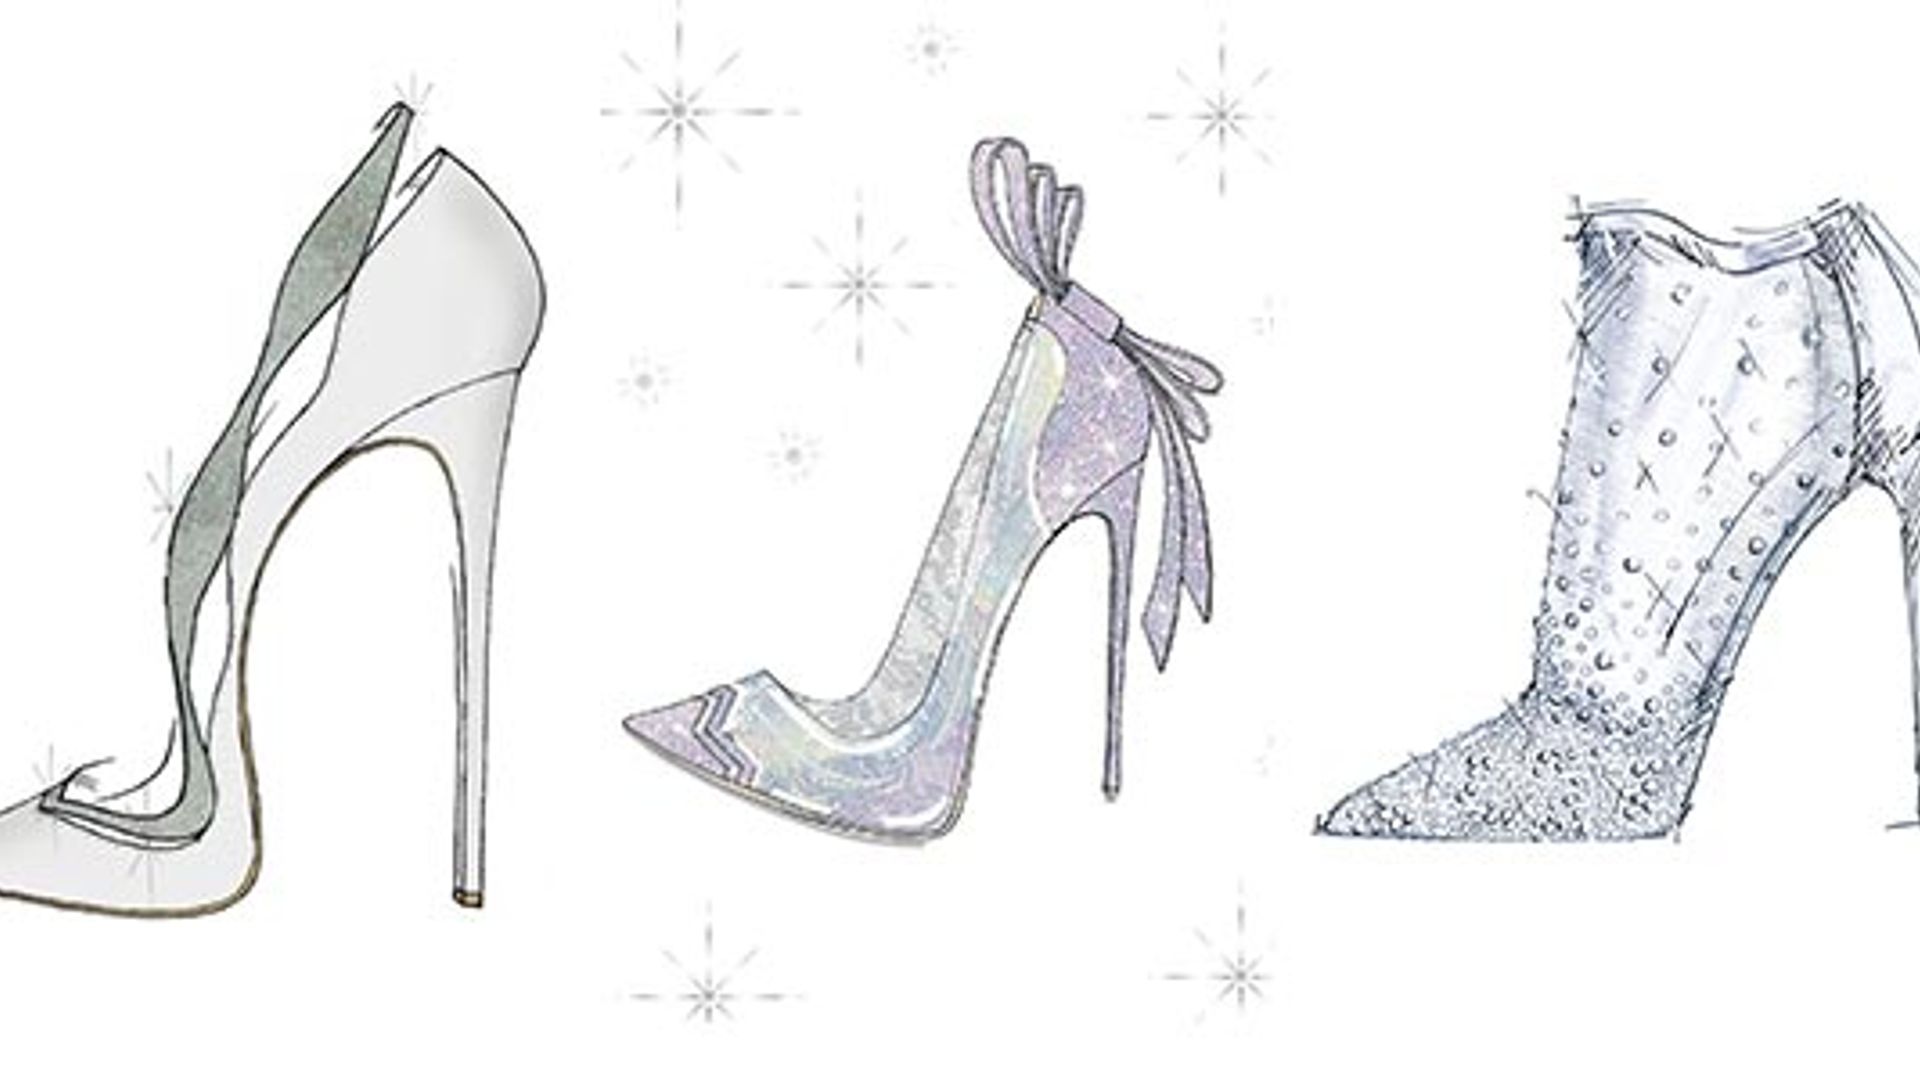 Louboutin's Cinderella slippers unveiled